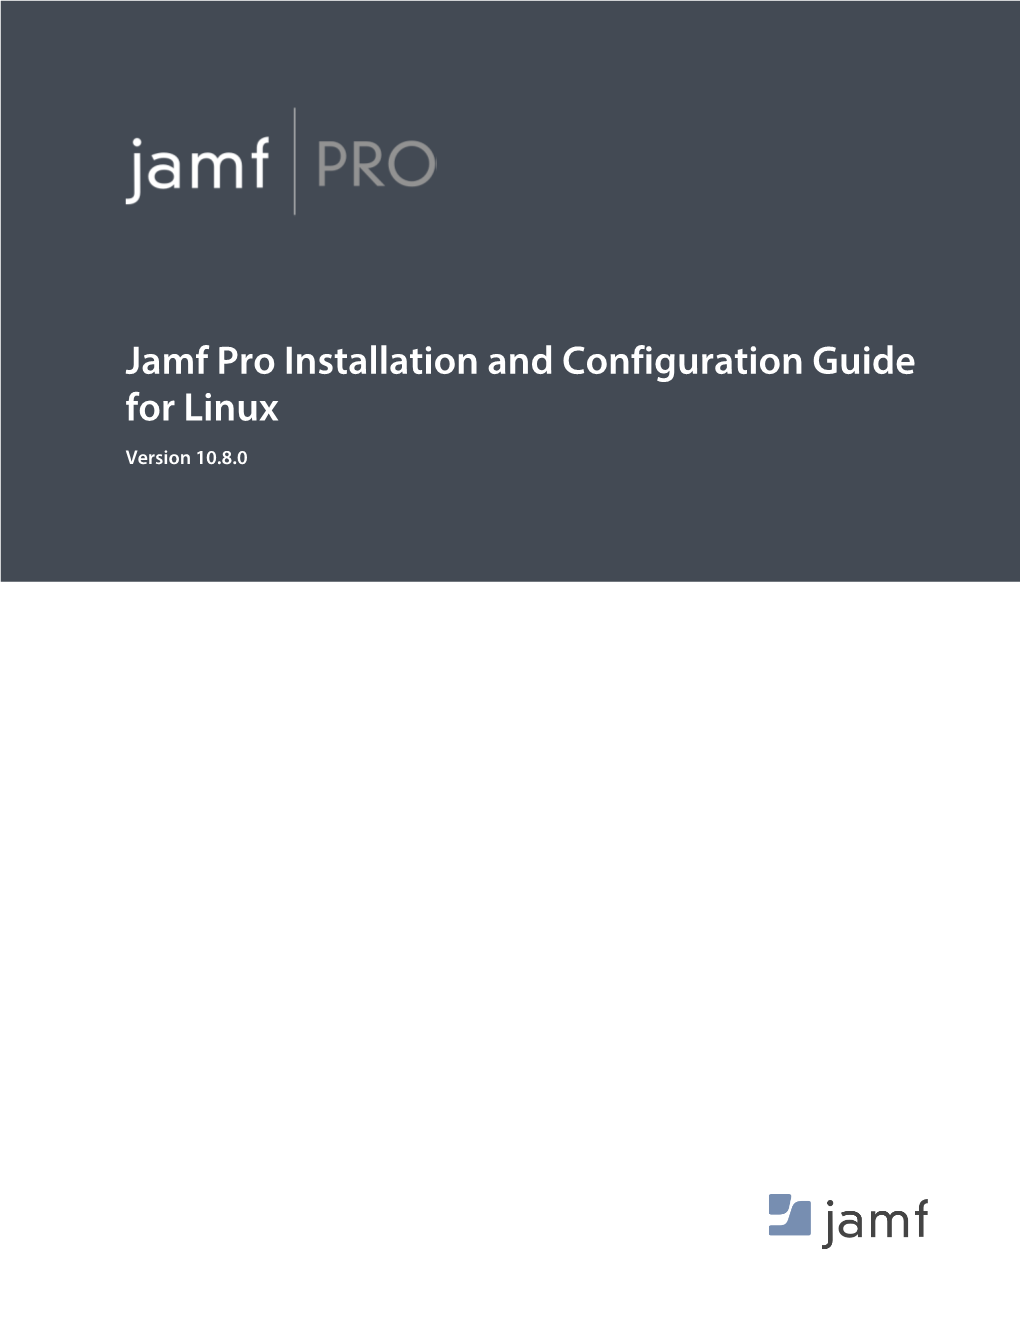 Jamf Pro Installation and Configuration Guide for Linux Version 10.8.0 © Copyright 2002-2018 Jamf